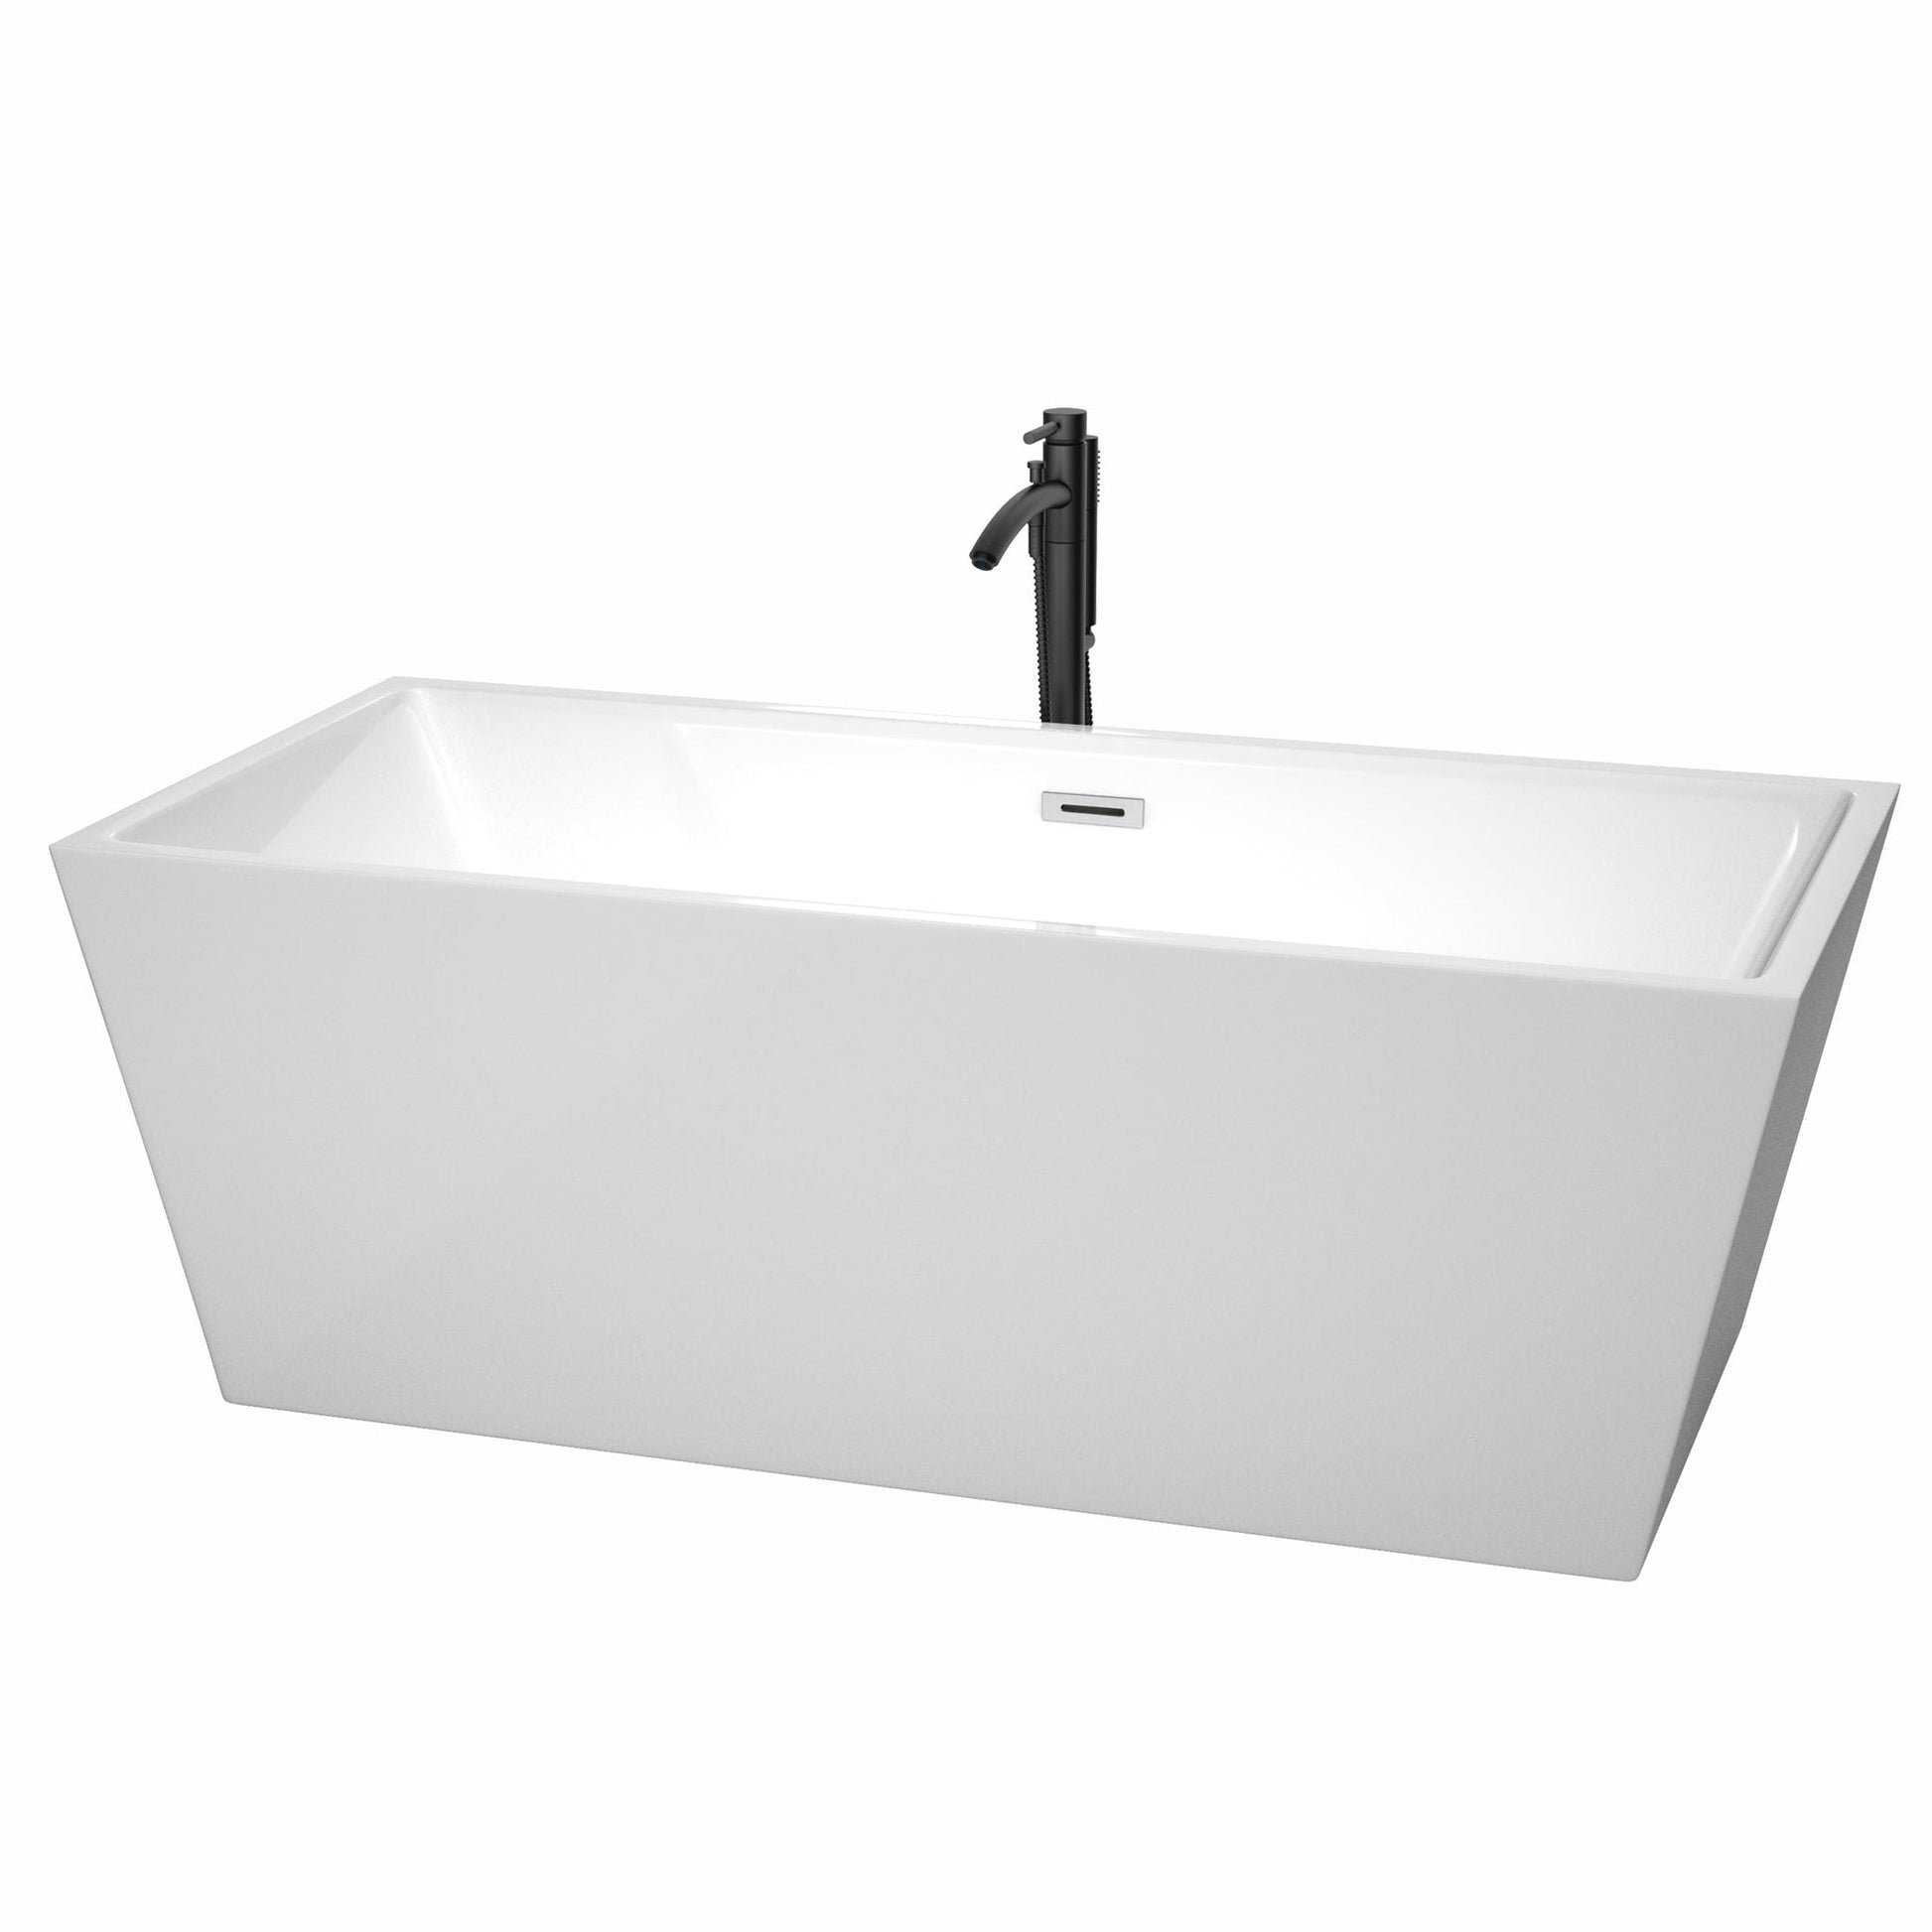 Wyndham Collection Sara 67" Freestanding Bathtub in White With Polished Chrome Trim and Floor Mounted Faucet in Matte Black